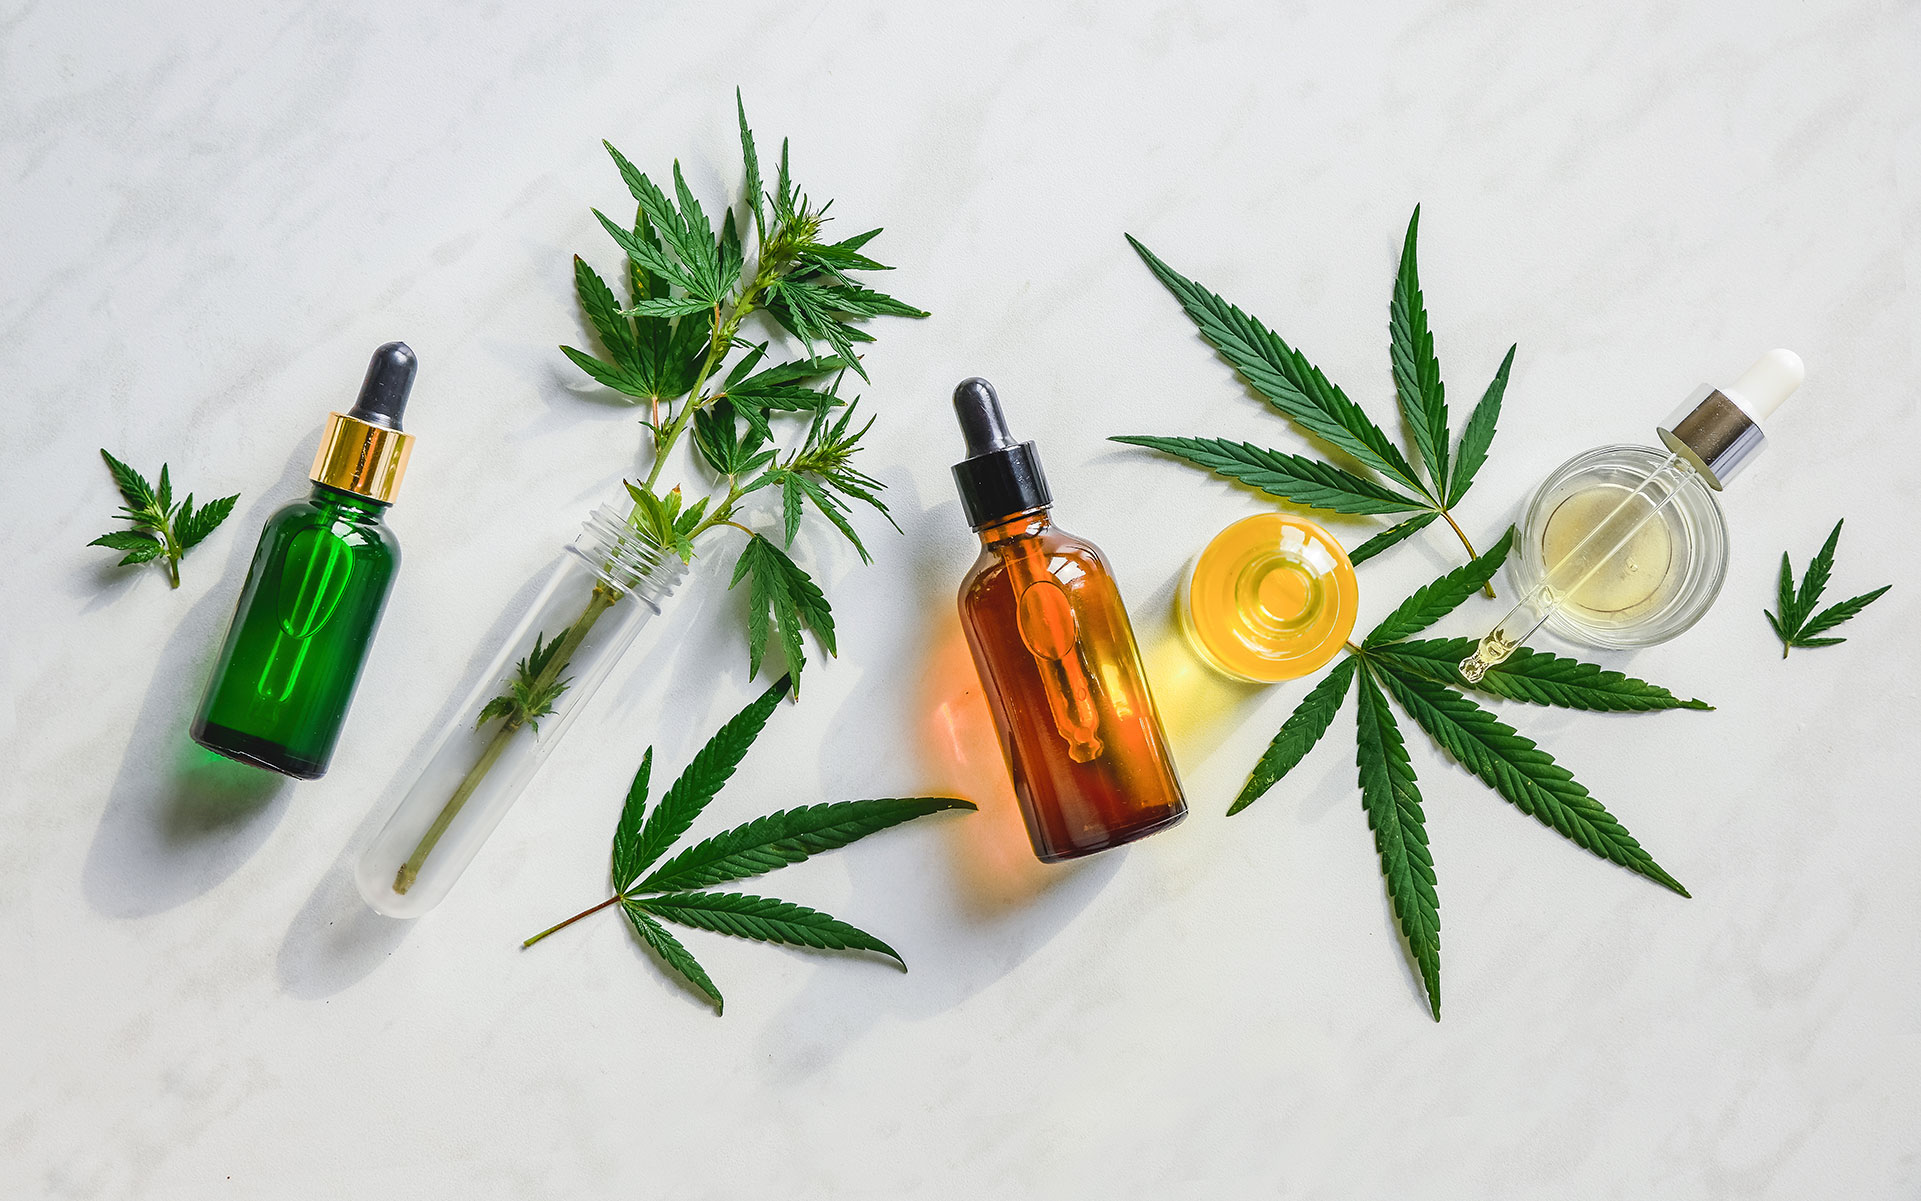 How To Know If Cbd Oil Is Good Quality - Cbd|Oil|Cannabidiol|Products|View|Abstract|Effects|Hemp|Cannabis|Product|Thc|Pain|People|Health|Body|Plant|Cannabinoids|Medications|Oils|Drug|Benefits|System|Study|Marijuana|Anxiety|Side|Research|Effect|Liver|Quality|Treatment|Studies|Epilepsy|Symptoms|Gummies|Compounds|Dose|Time|Inflammation|Bottle|Cbd Oil|View Abstract|Side Effects|Cbd Products|Endocannabinoid System|Multiple Sclerosis|Cbd Oils|Cbd Gummies|Cannabis Plant|Hemp Oil|Cbd Product|Hemp Plant|United States|Cytochrome P450|Many People|Chronic Pain|Nuleaf Naturals|Royal Cbd|Full-Spectrum Cbd Oil|Drug Administration|Cbd Oil Products|Medical Marijuana|Drug Test|Heavy Metals|Clinical Trial|Clinical Trials|Cbd Oil Side|Rating Highlights|Wide Variety|Animal Studies